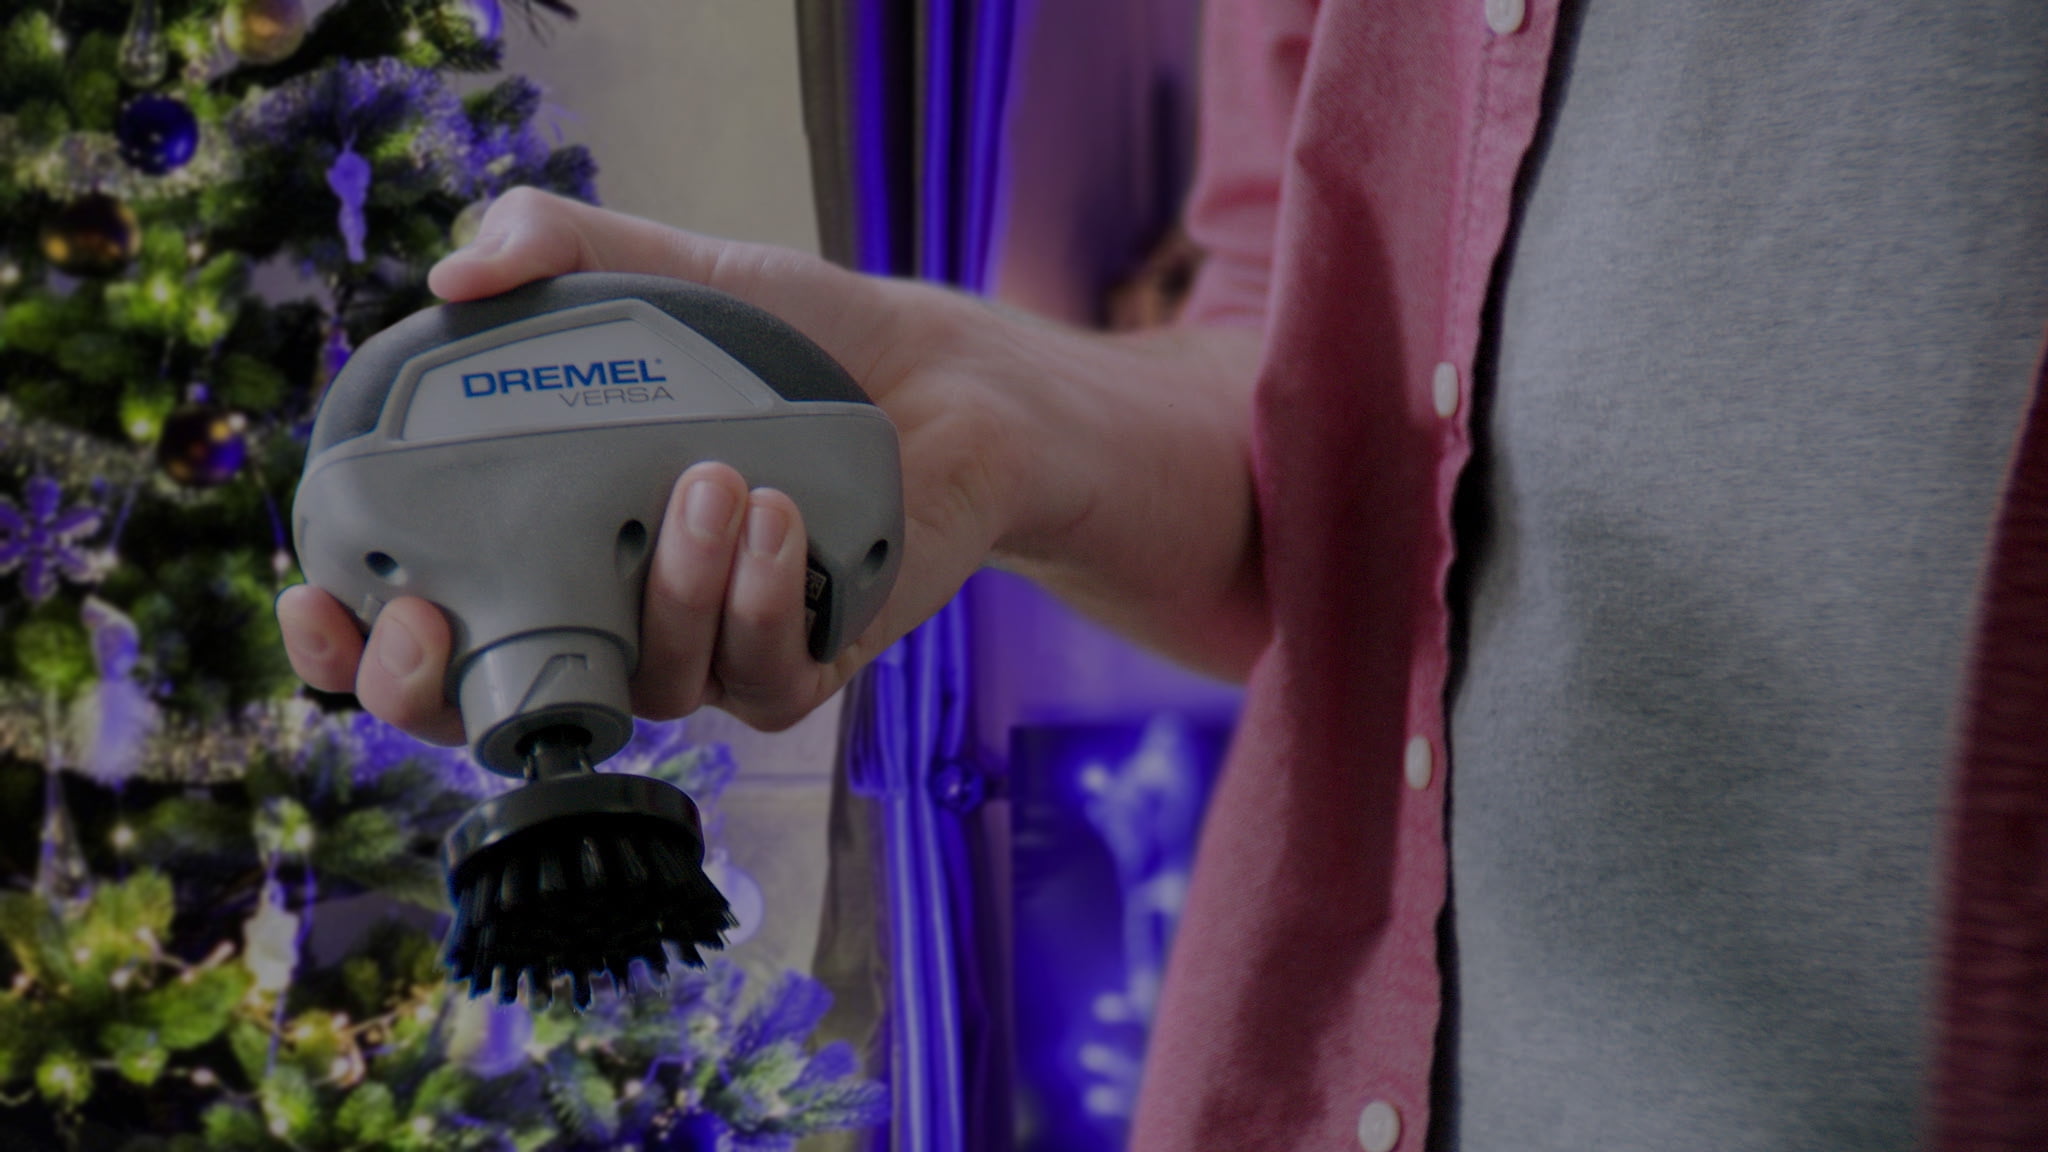 Dremel Versa Power Cleaning Tool Bathrooms, Kit for Sinks, Tubs, Auto, Pans, & Stoves, Tile, Grills